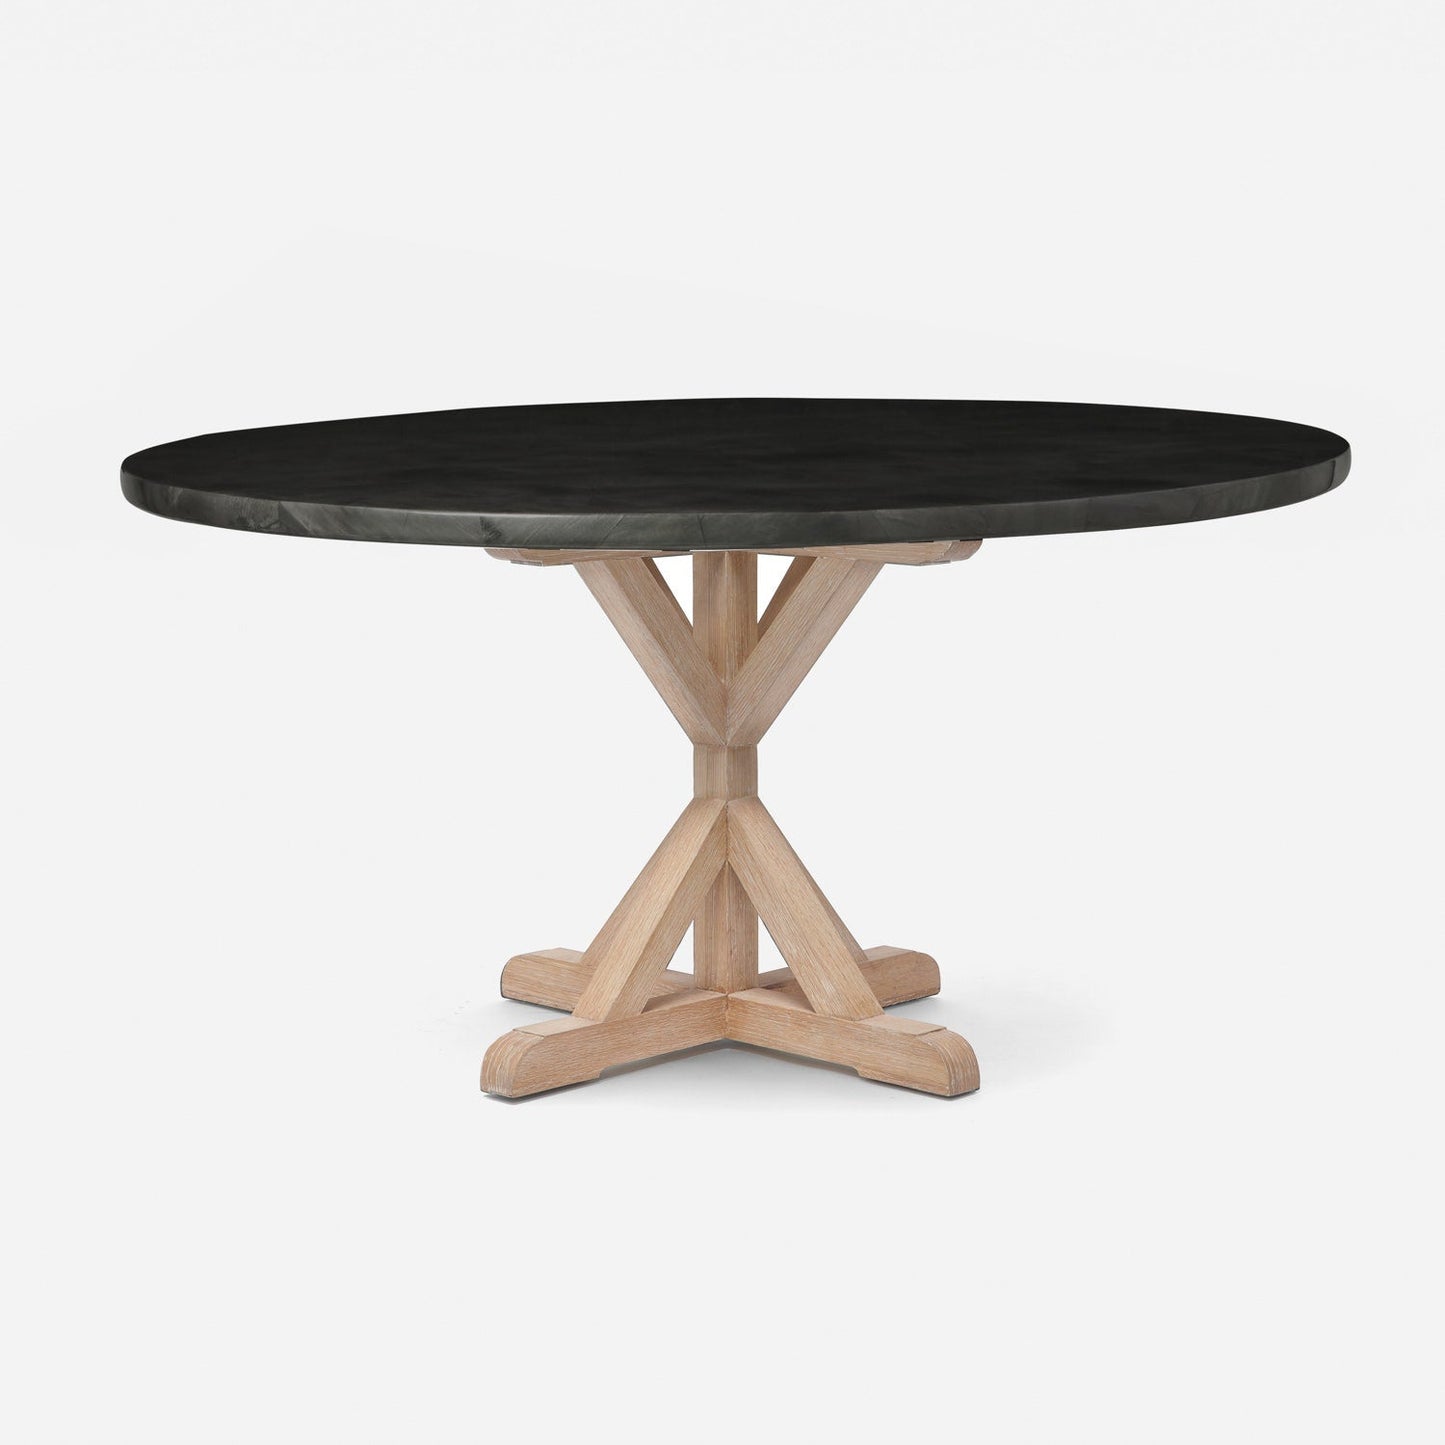 Made Goods Dane 54" x 30" White Cerused Oak Dinning Table With Round Dark Faux Horn Table Top